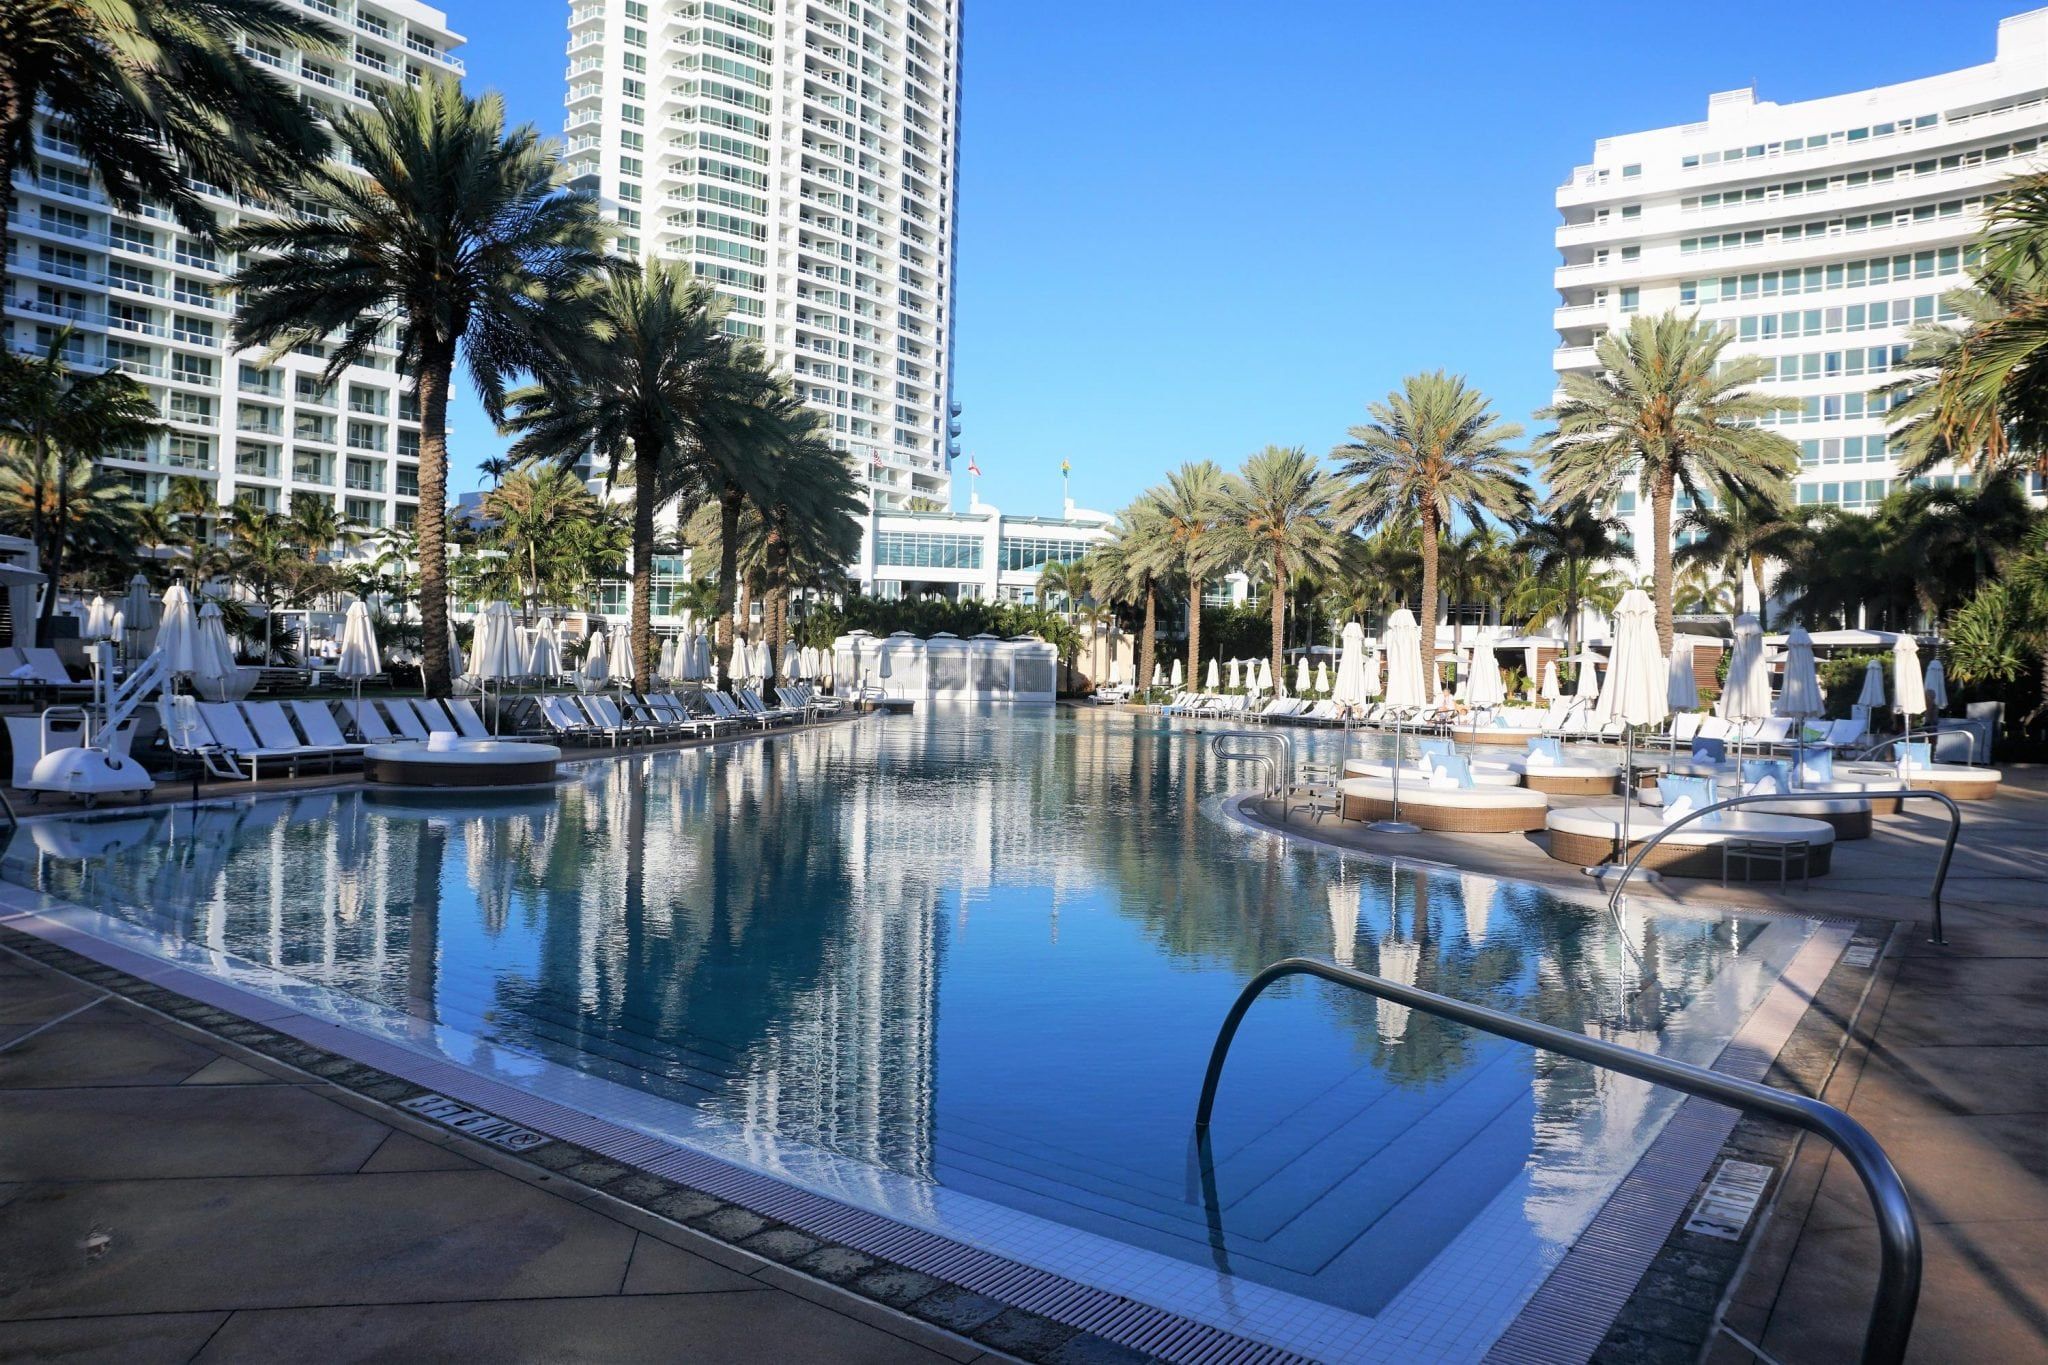 Bow Tie Pool at Fontainebleau Hotel Review